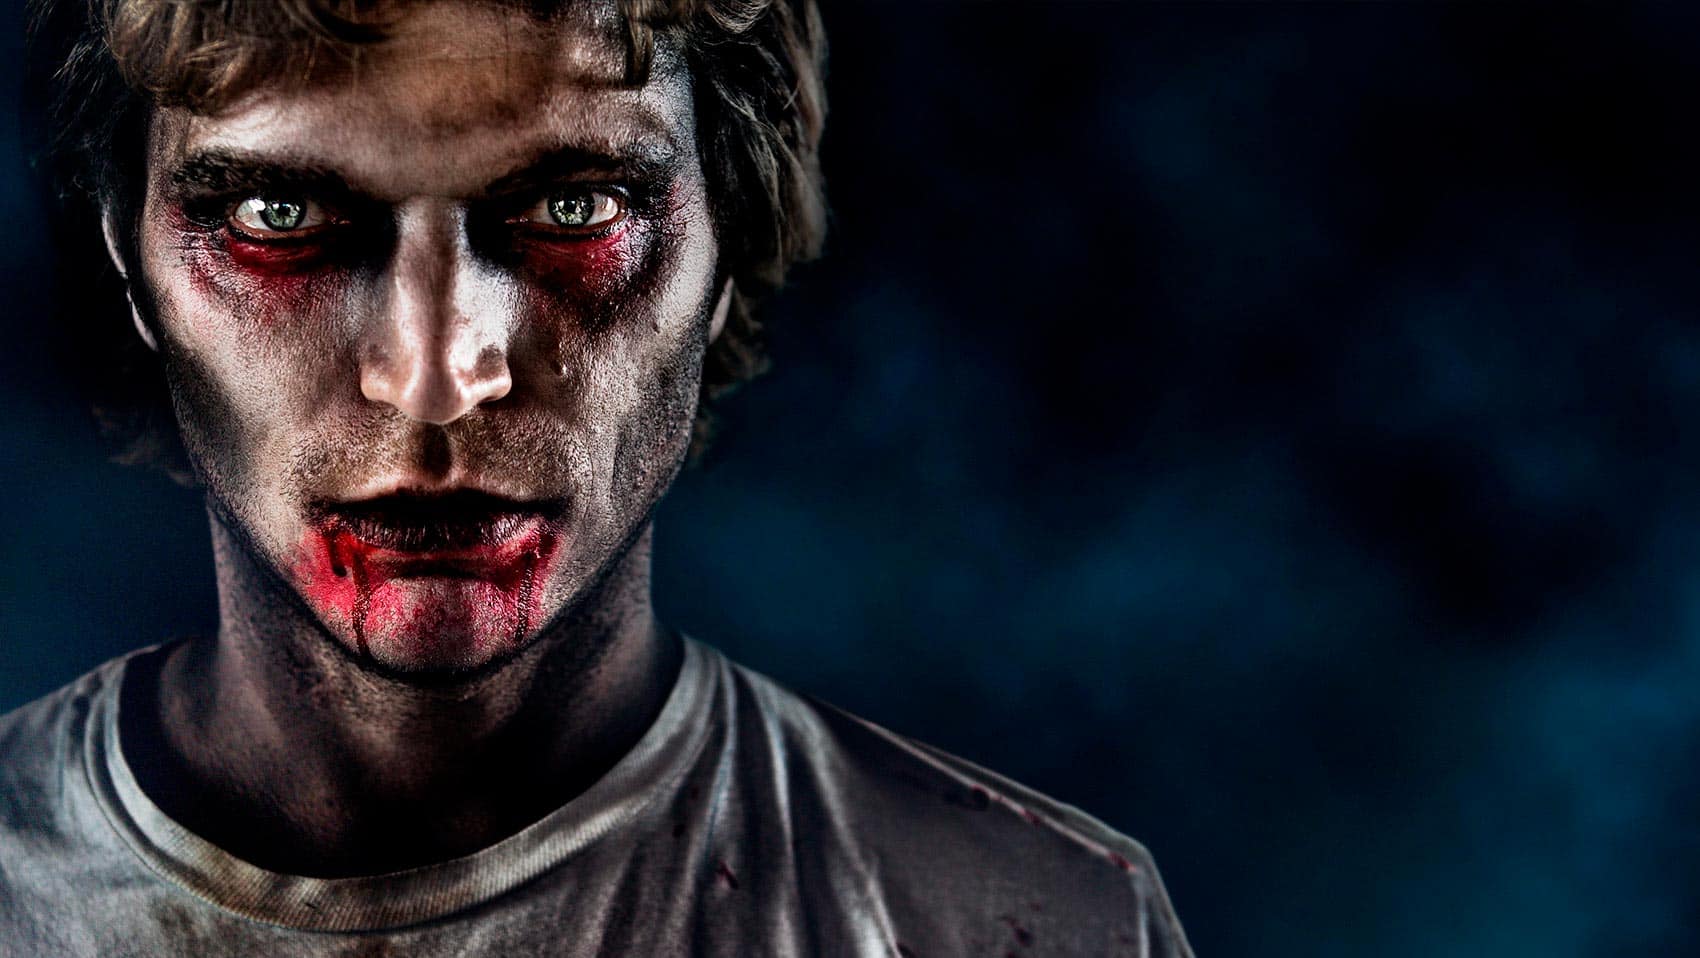 Male Containment zombie with dramatic lighting against blue background